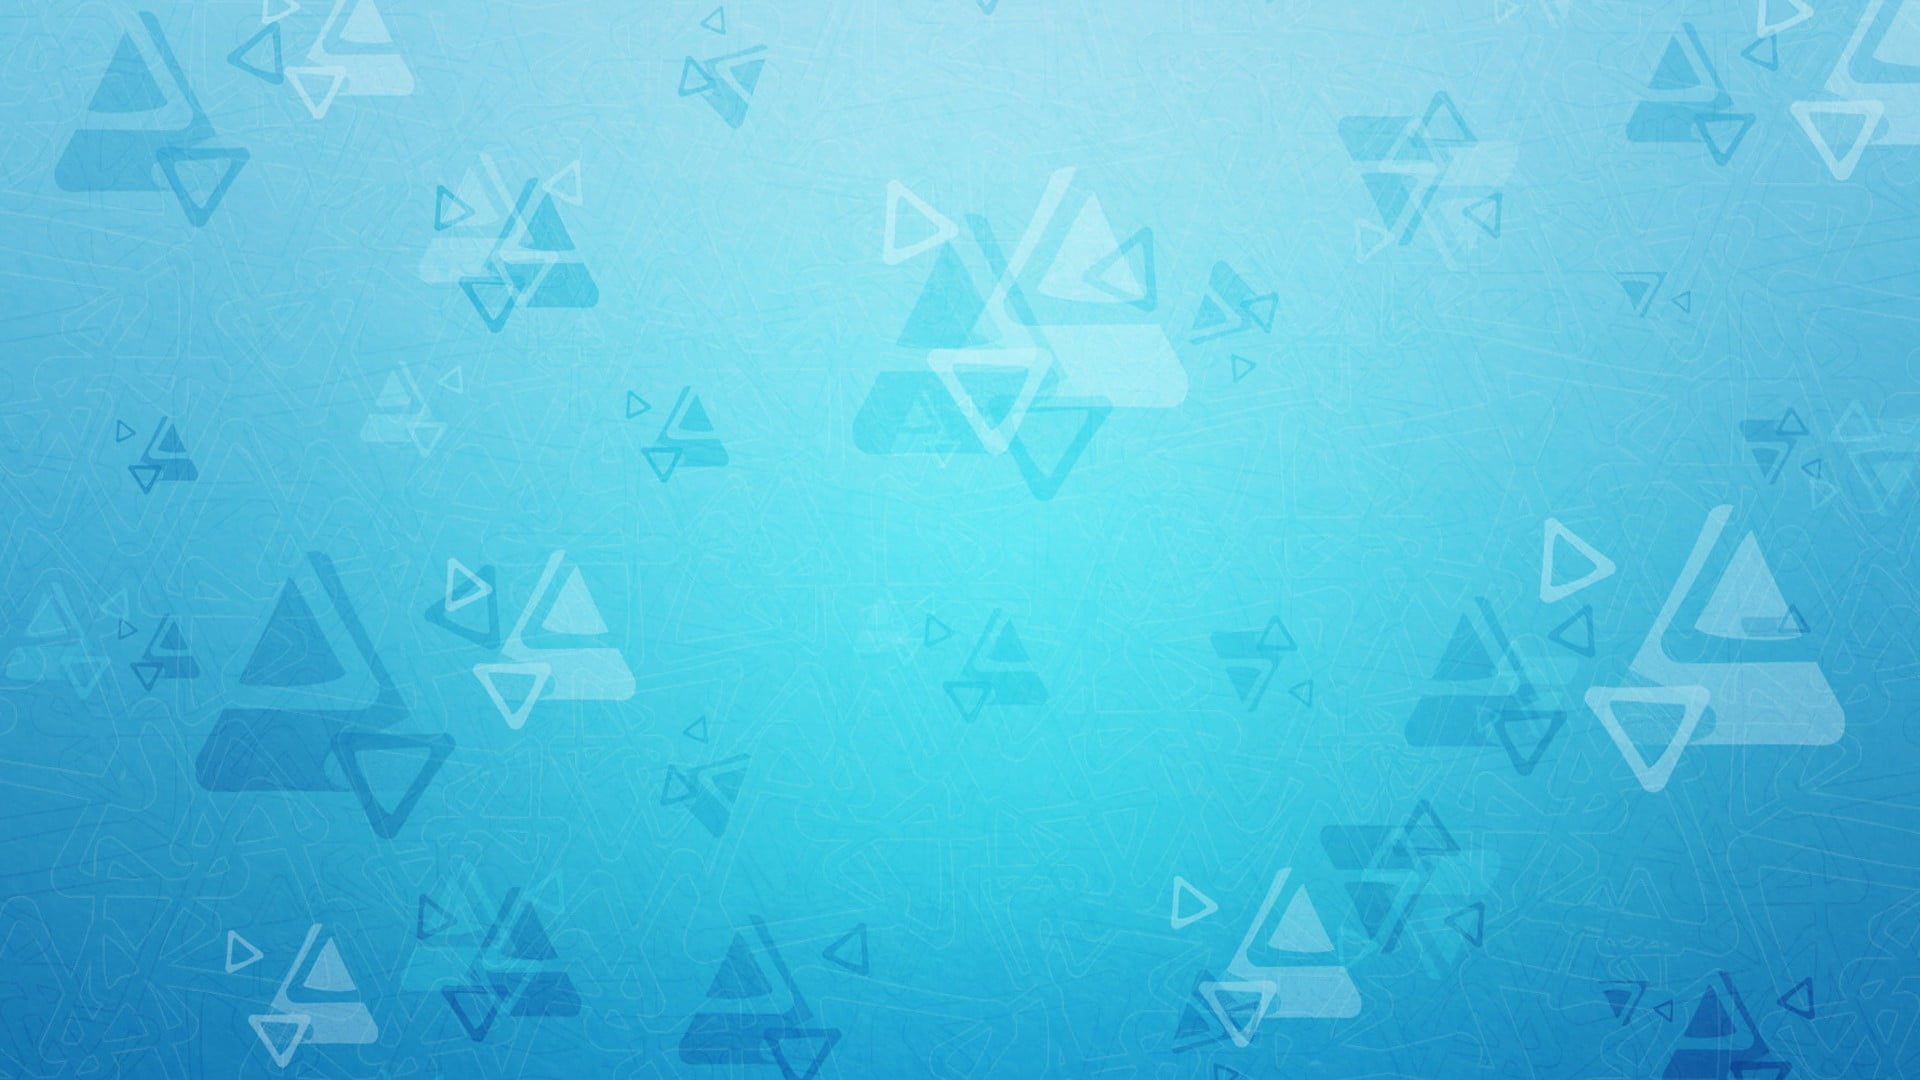 triangle wallpaper, abstract, geometry, blue